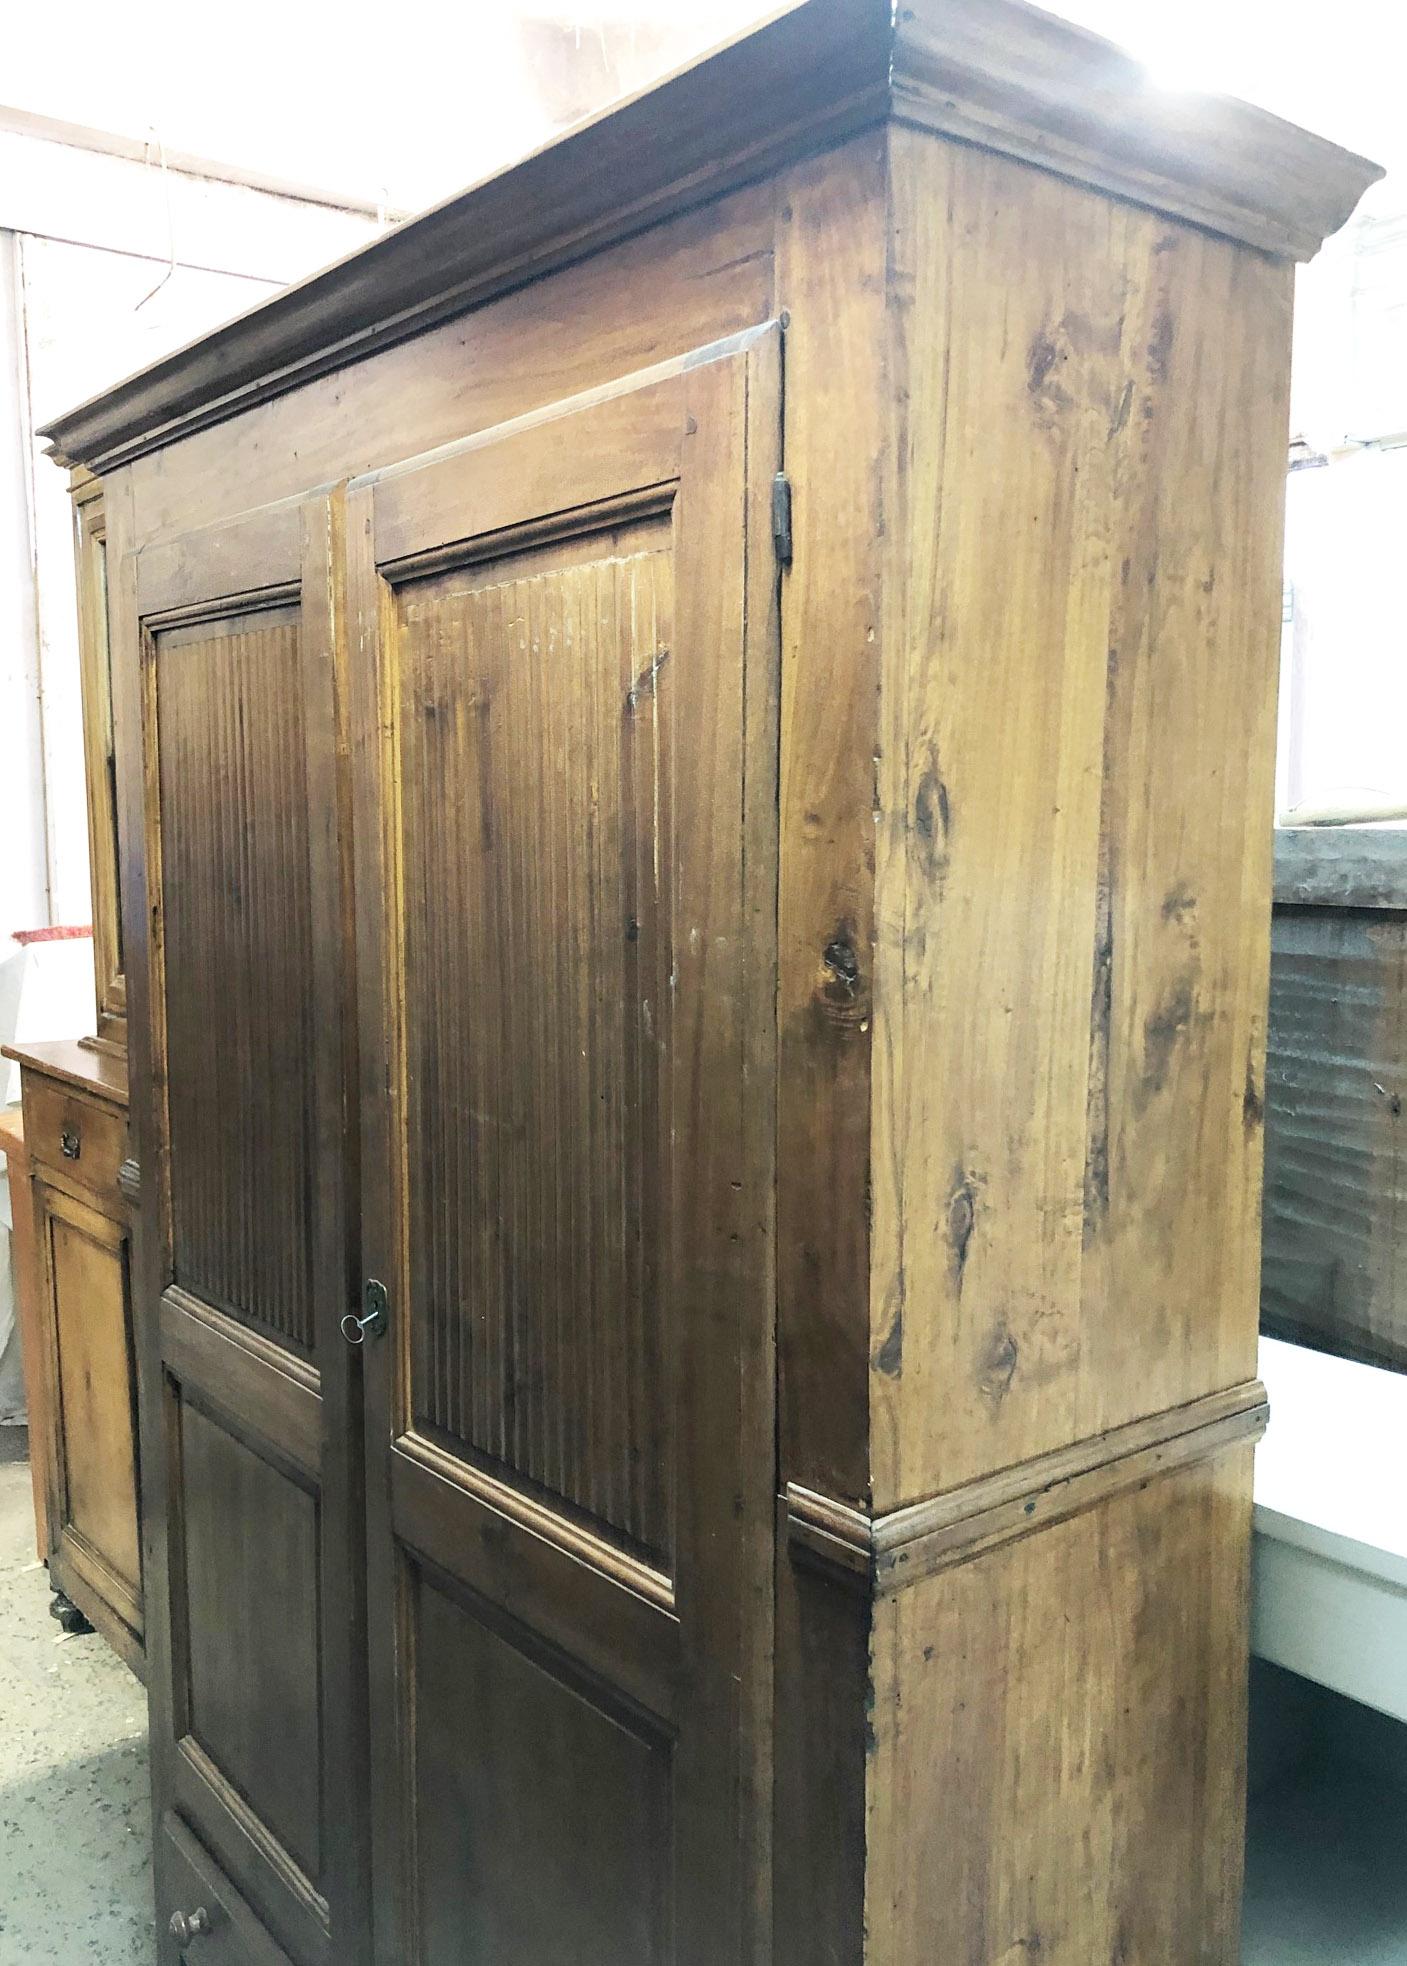 Original Piedmontese antique wardrobe, with two doors, removable.
The cabinet divides into two parts in half to be easily transported.
Inside it has a clothes rail and a shelf at the bottom
It also has an outside drawer for linen.
The cabinet